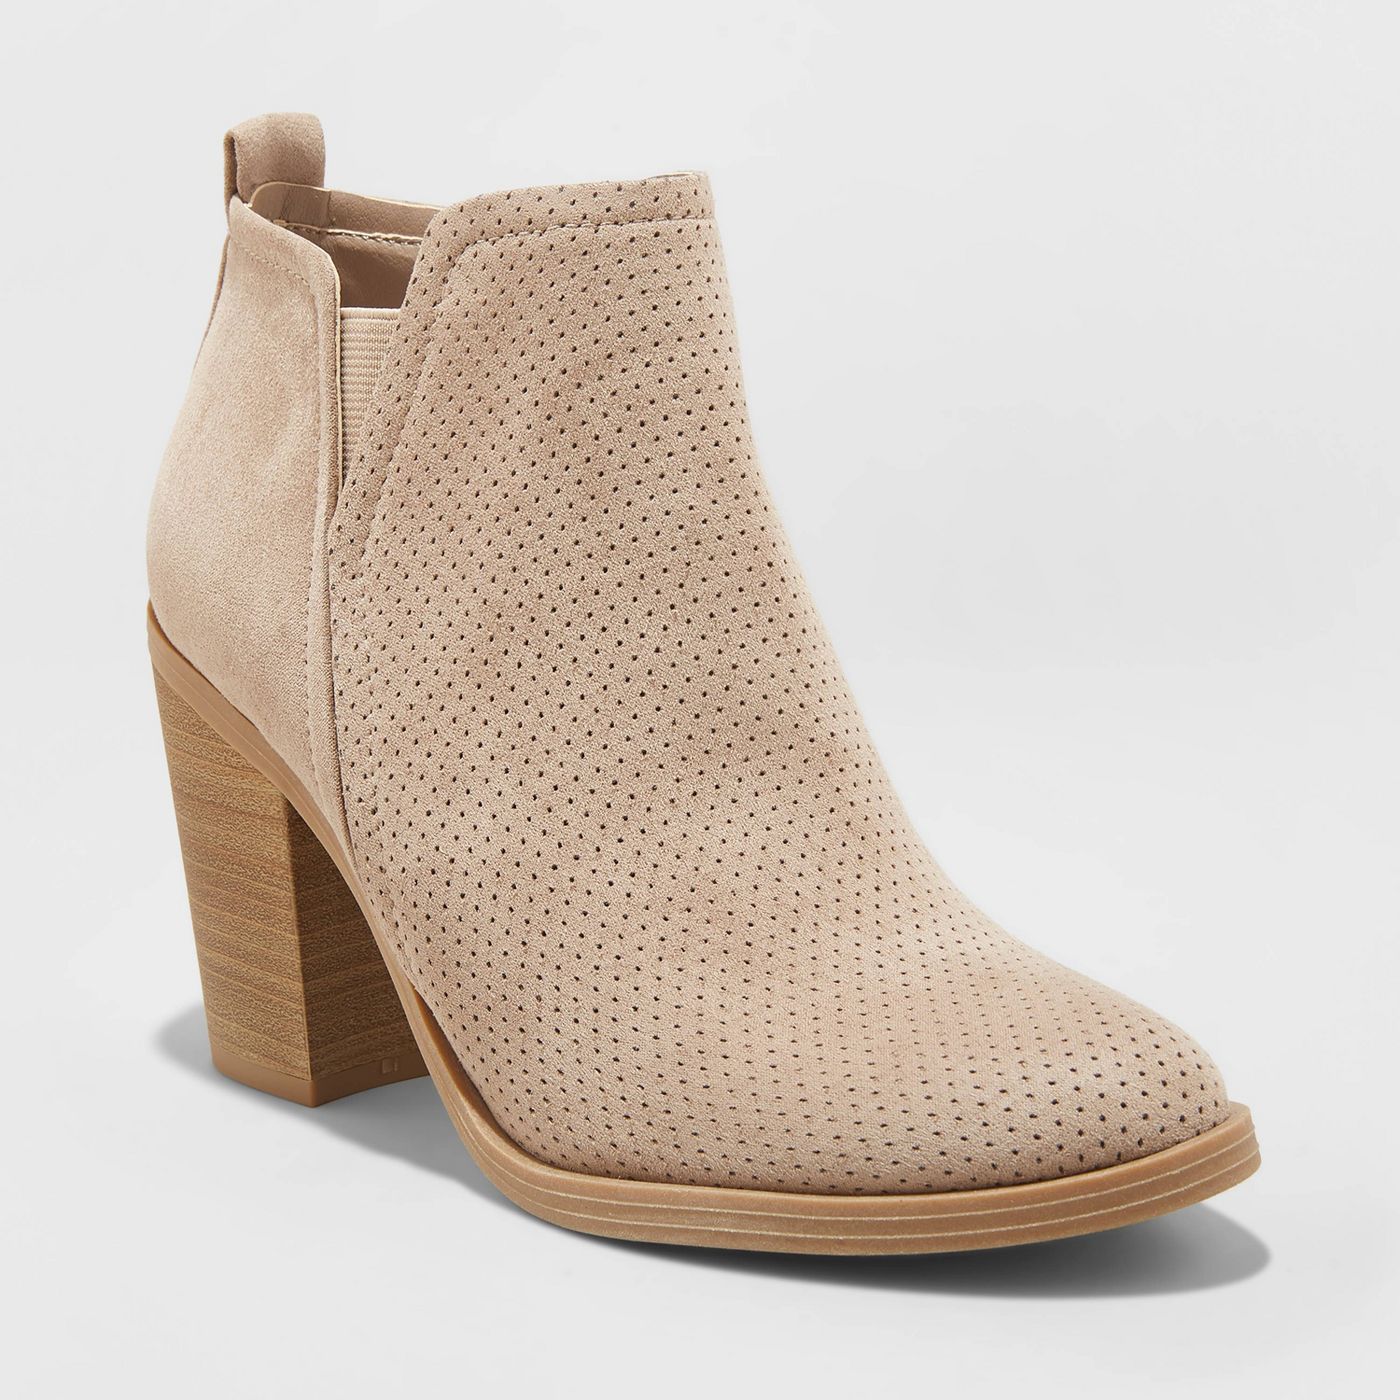 Women's Avalyn Microsuede Laser Cut Bootie - Universal Thread™ Taupe - image 1 of 3